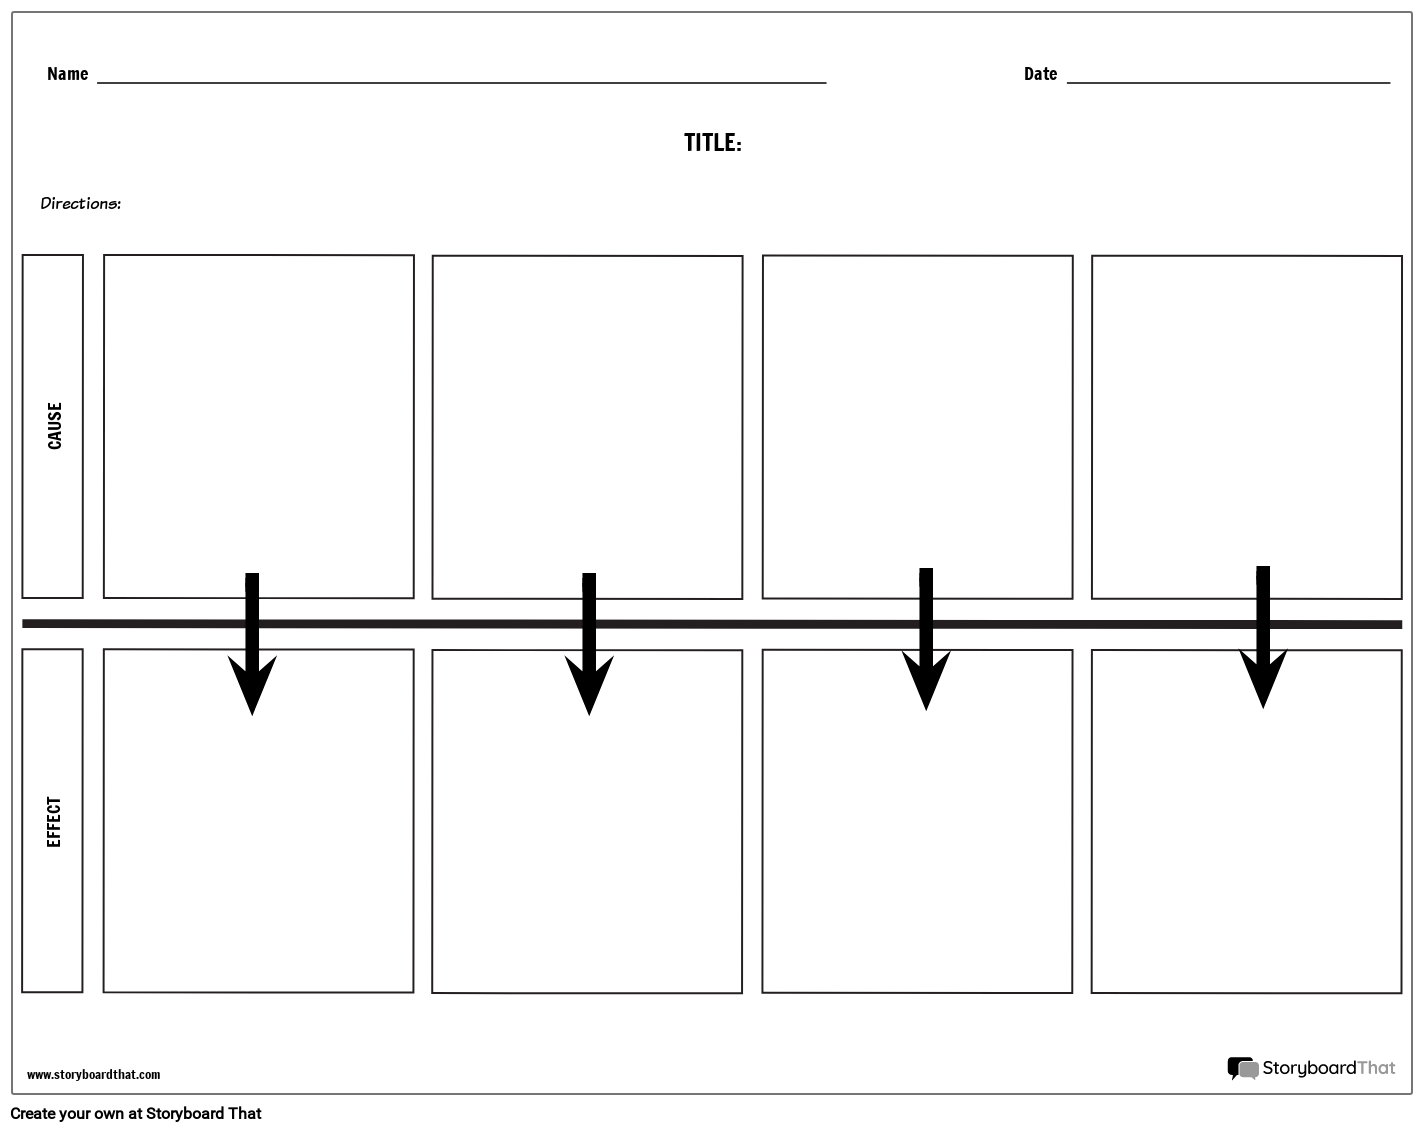 cause-and-effect-storyboard-by-worksheet-templates